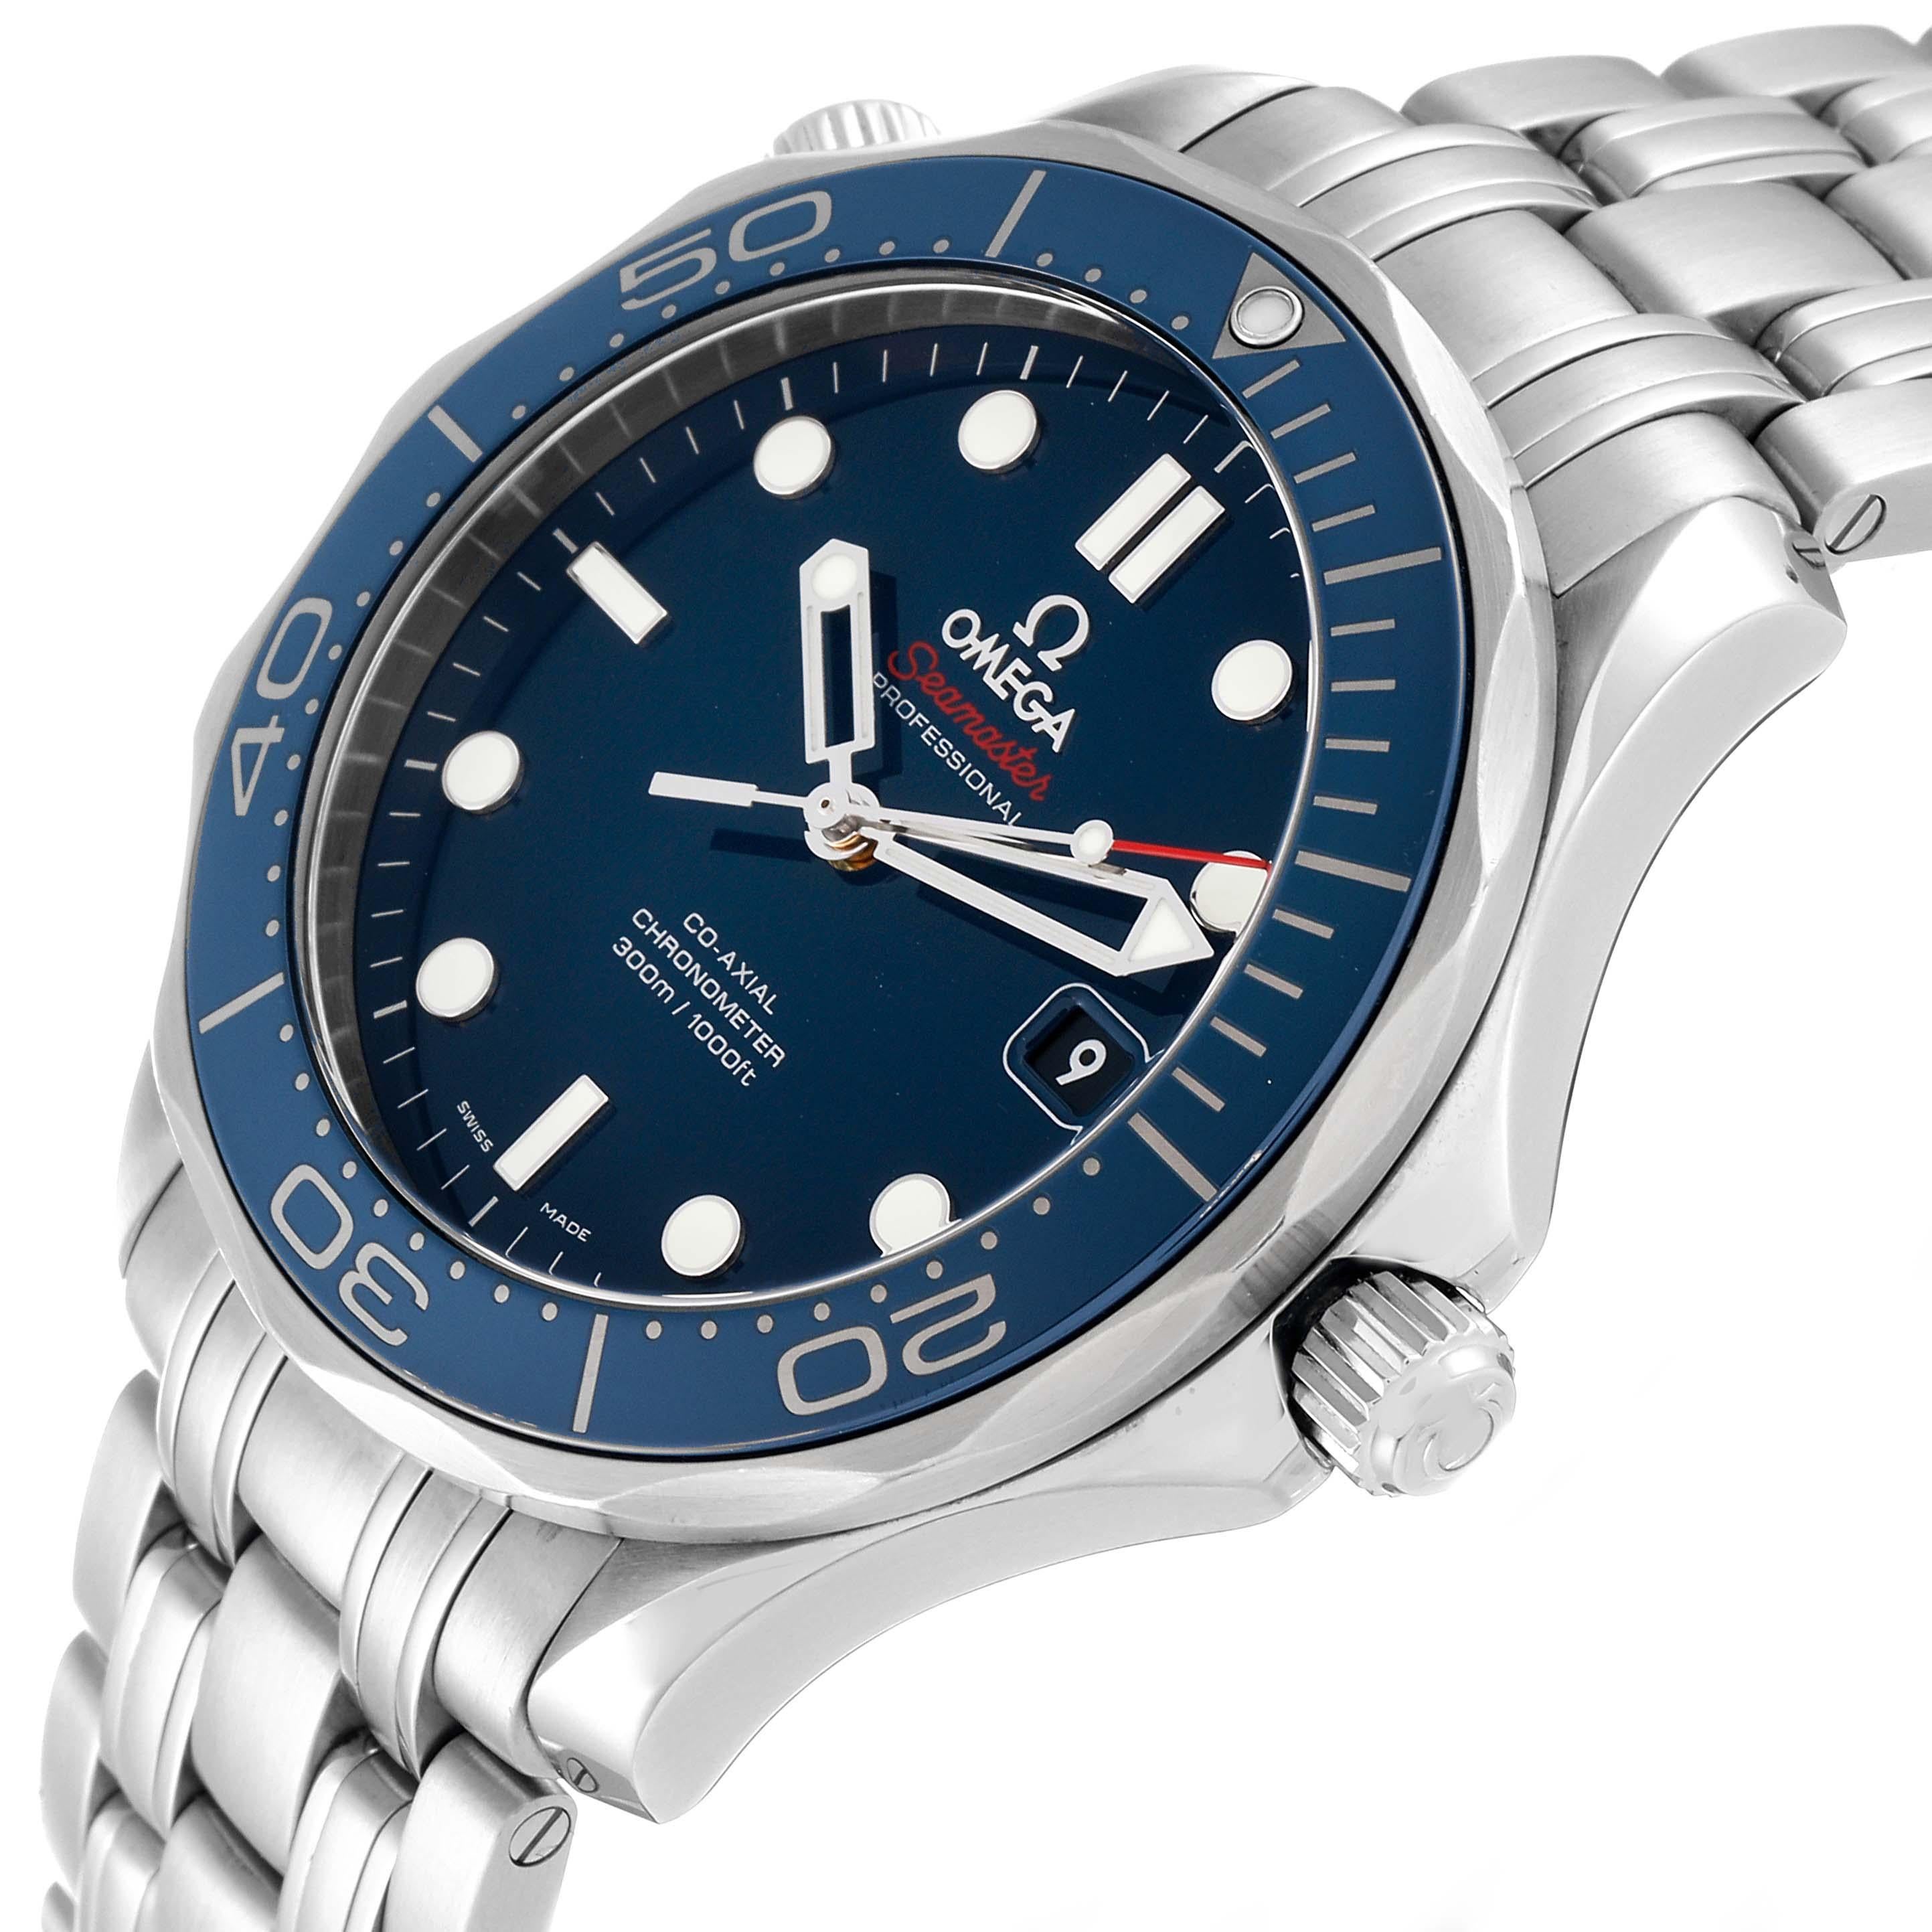 Omega Seamaster Diver 300M Steel Mens Watch 212.30.41.20.03.001 For Sale 1